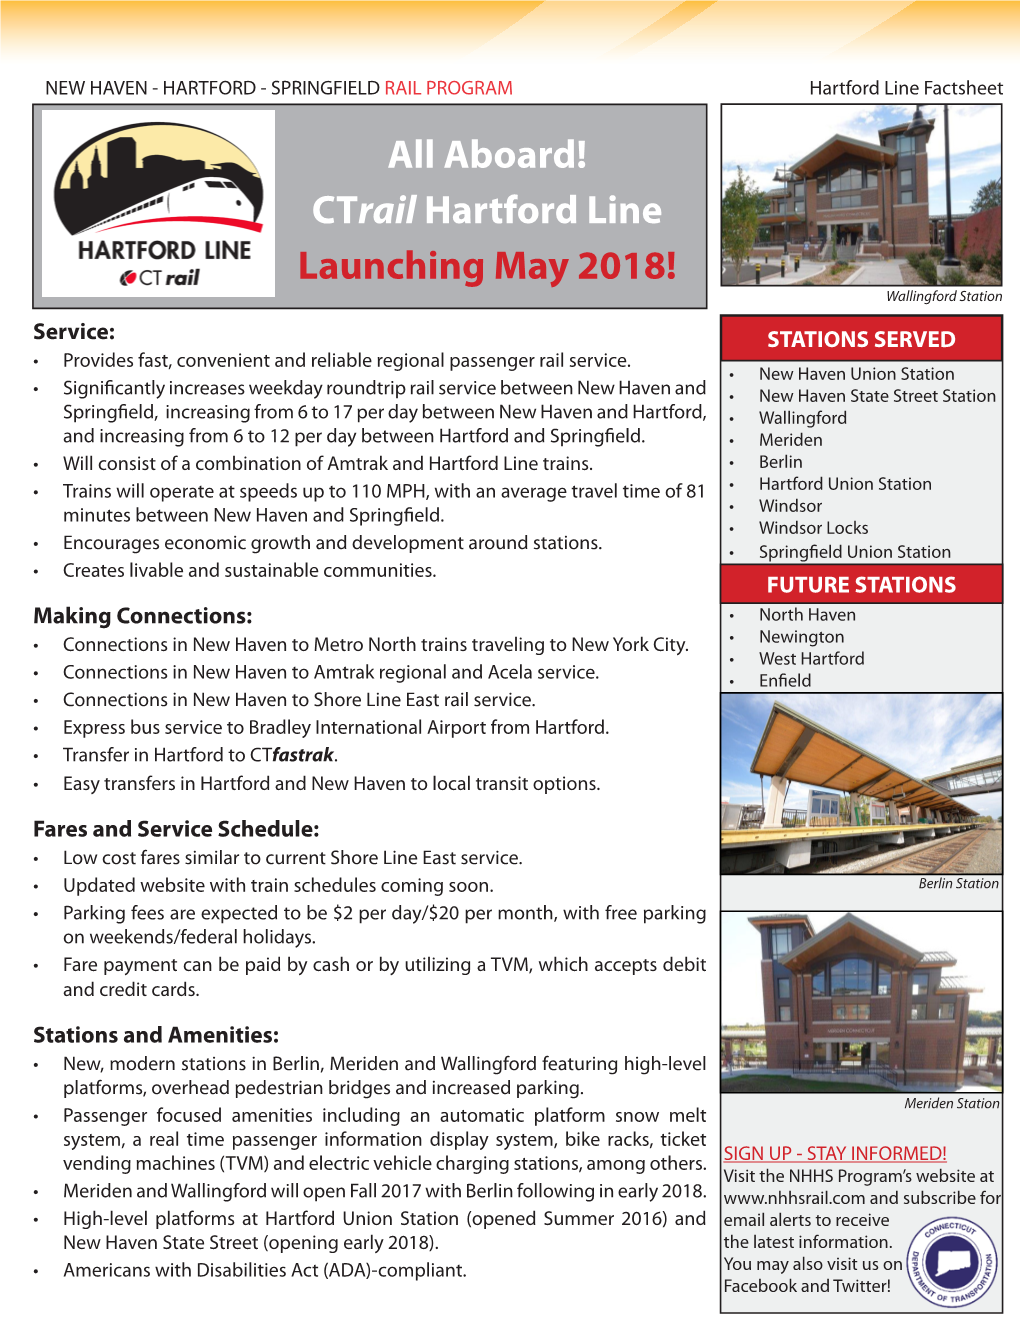 All Aboard! Ctrail Hartford Line Launching May 2018! Wallingford Station